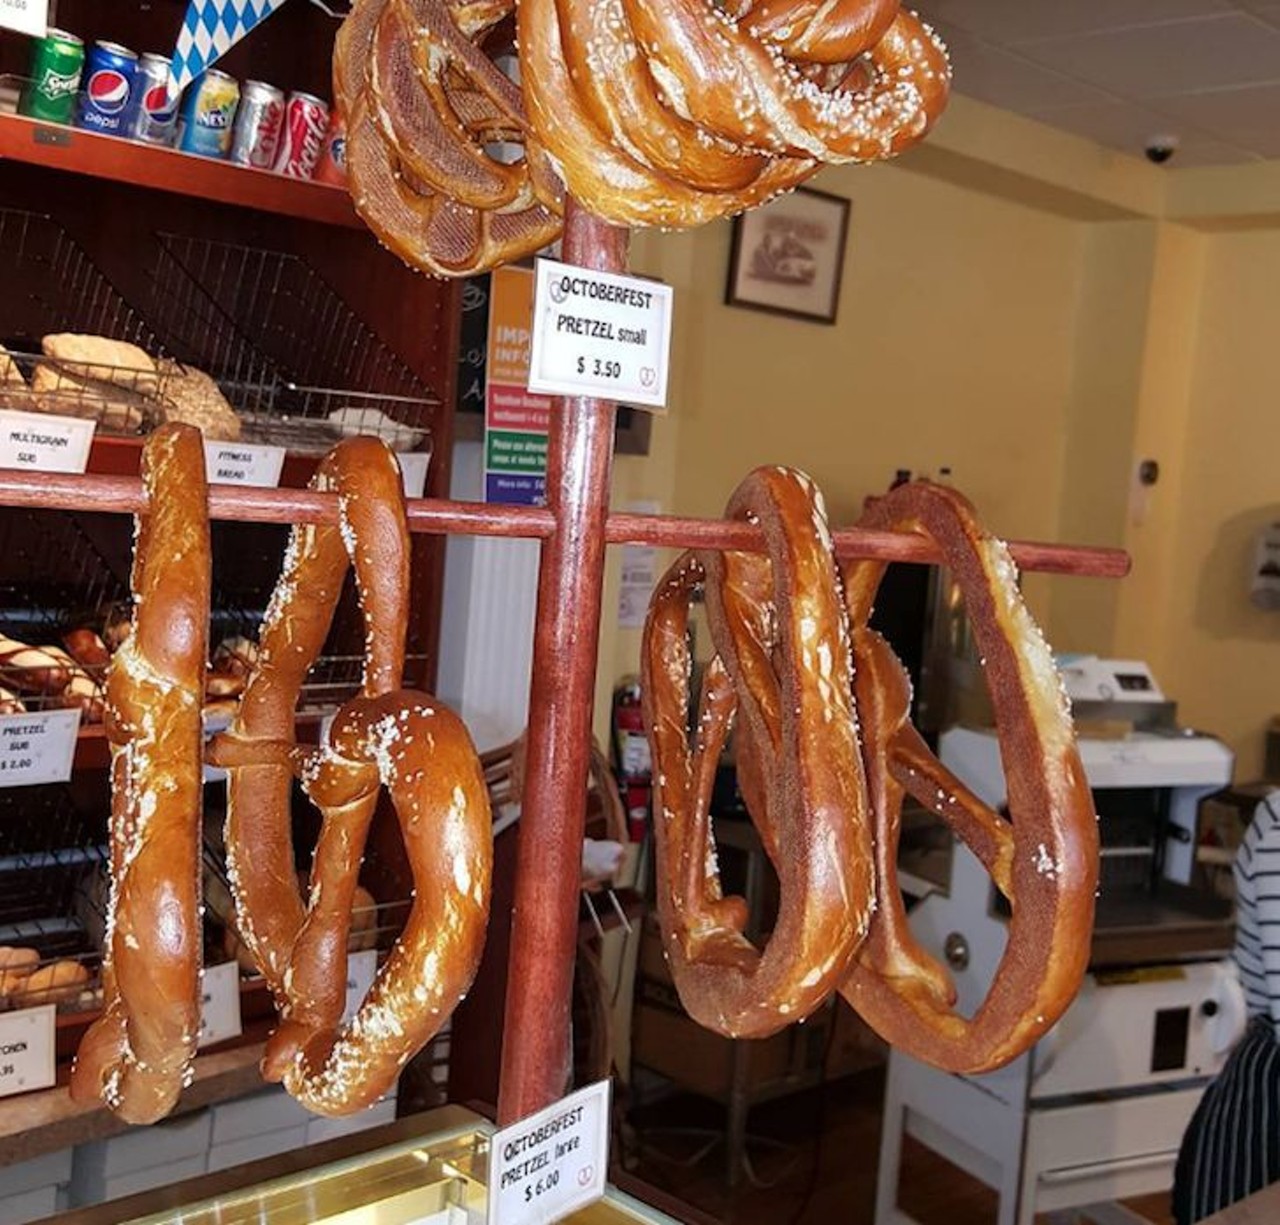 3:26 p.m. German Backhaus
1213 N. Orange Ave., Sat & Sun: 8 a.m. - 6 p.m.
What to order: Obtain a pretzel
Get some starch in your system as you turn the first corner in your walk down Inebriated Lane before you head up to Alden Road for your next stop.
Photo via backhausorlando/Instagram